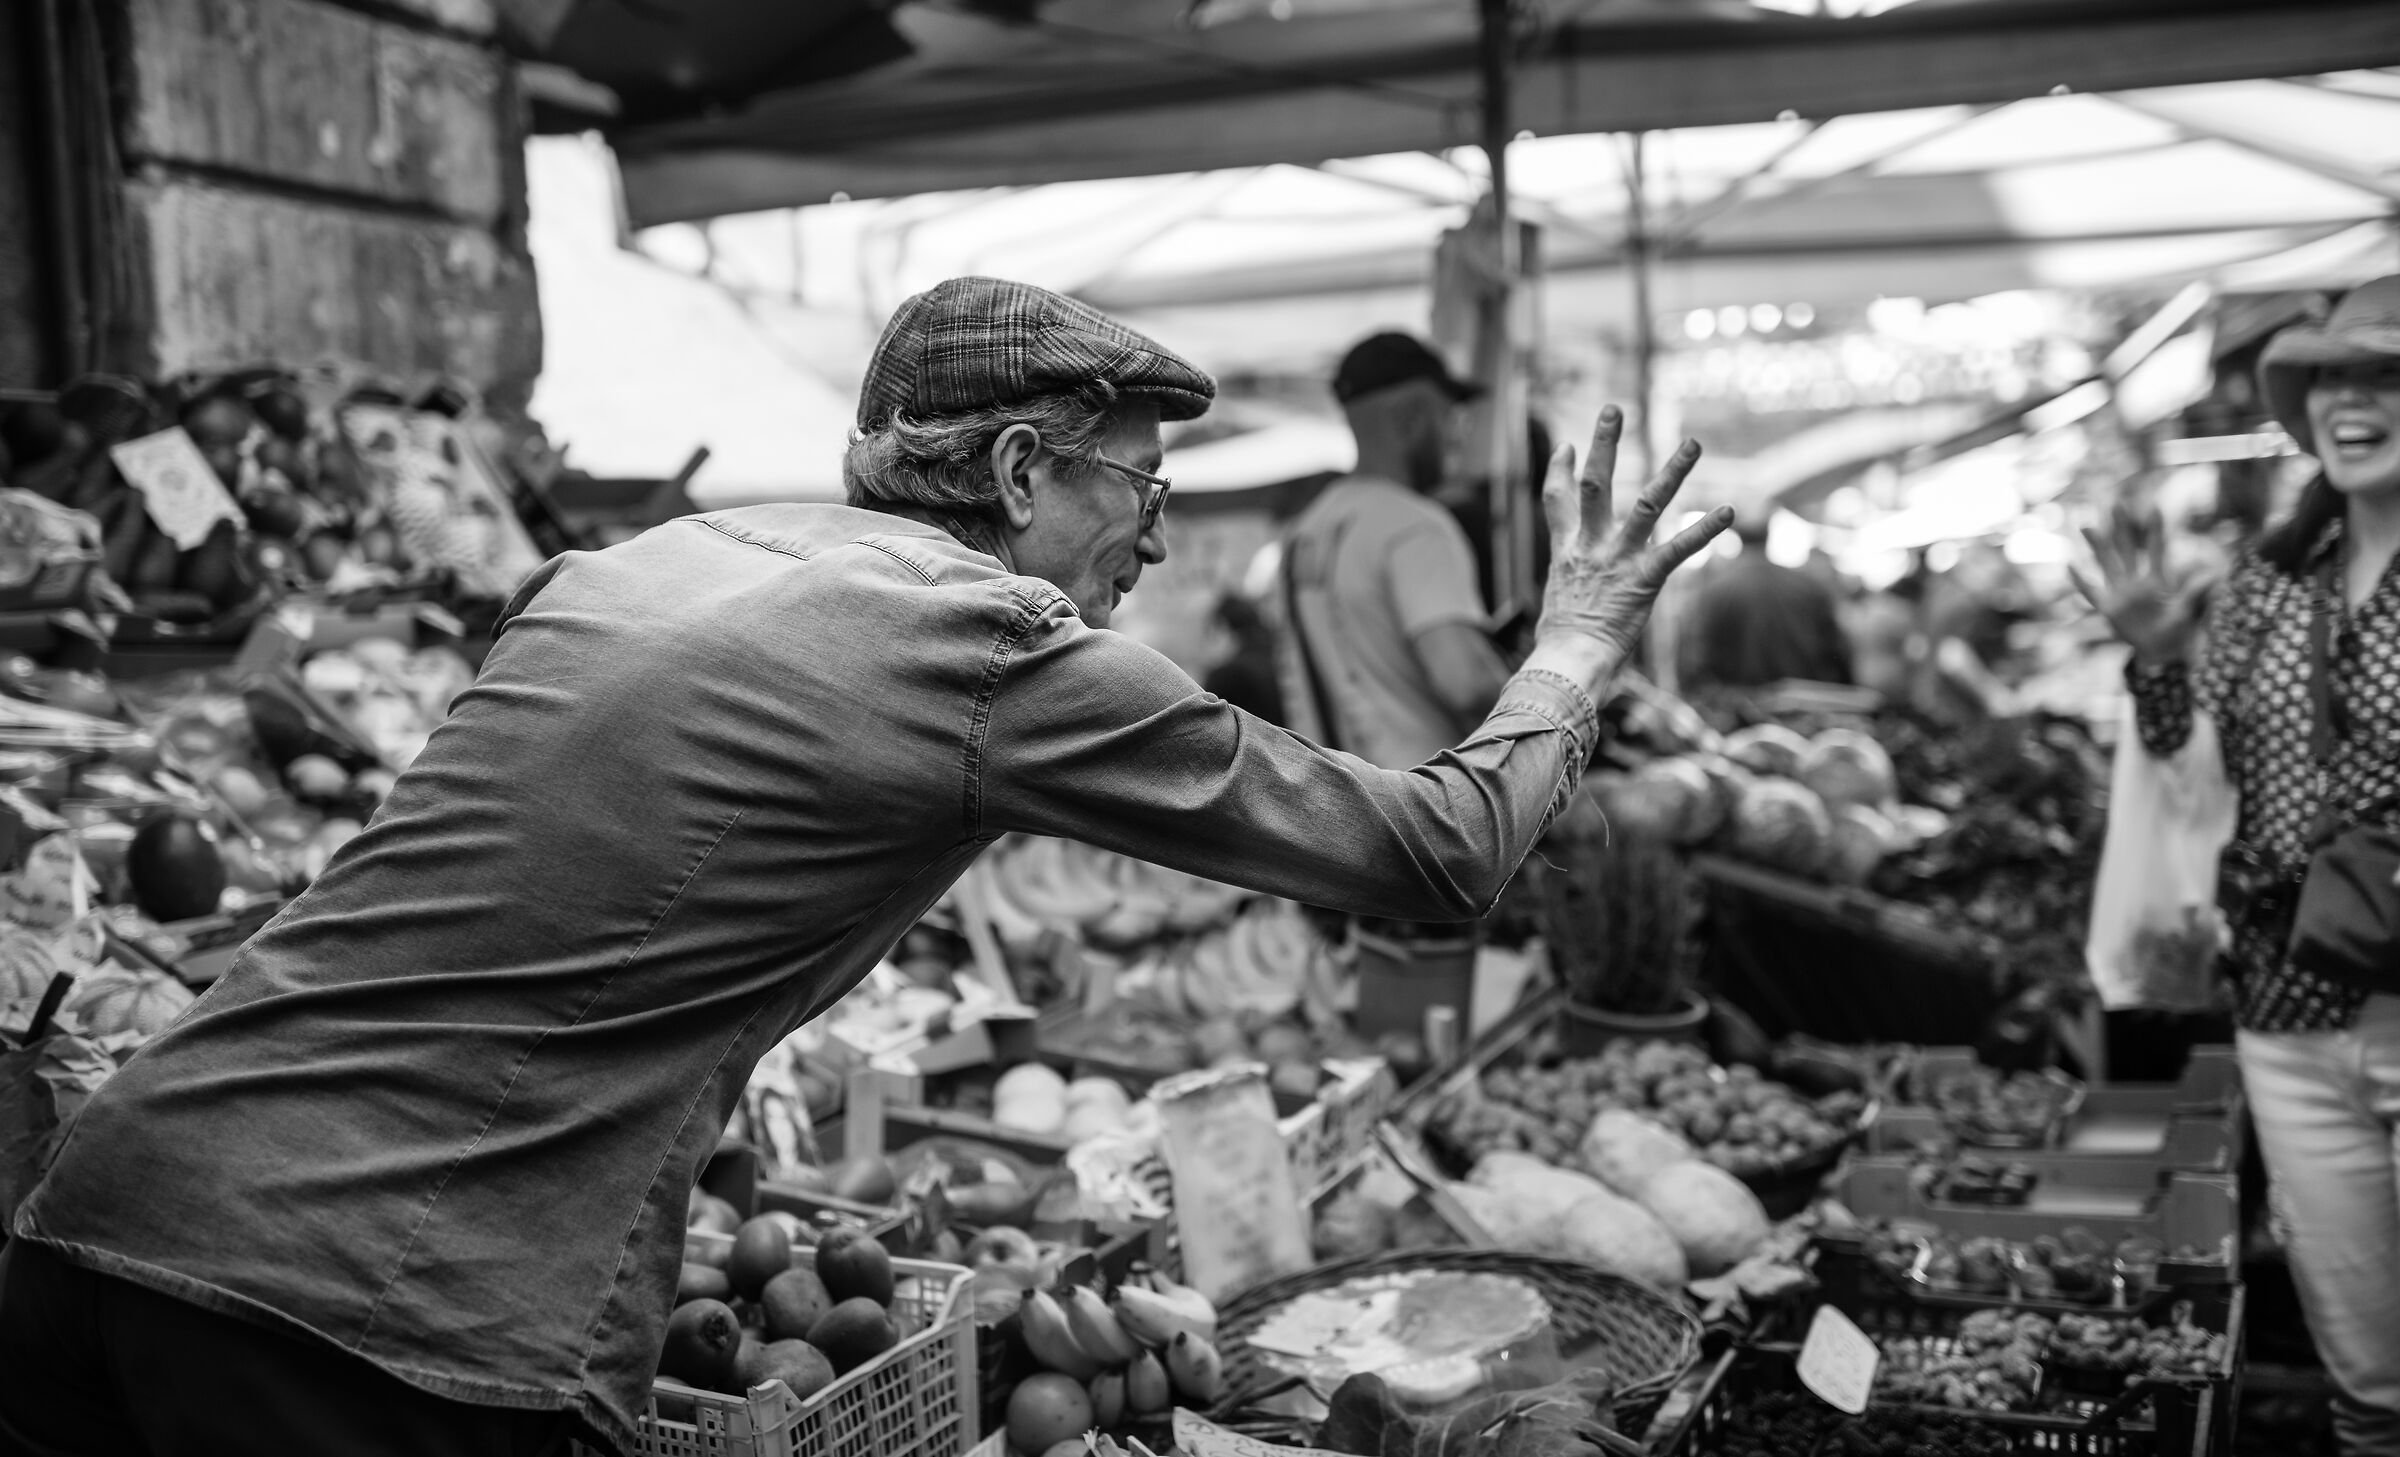 Scenes from the Market - The Scratch ...